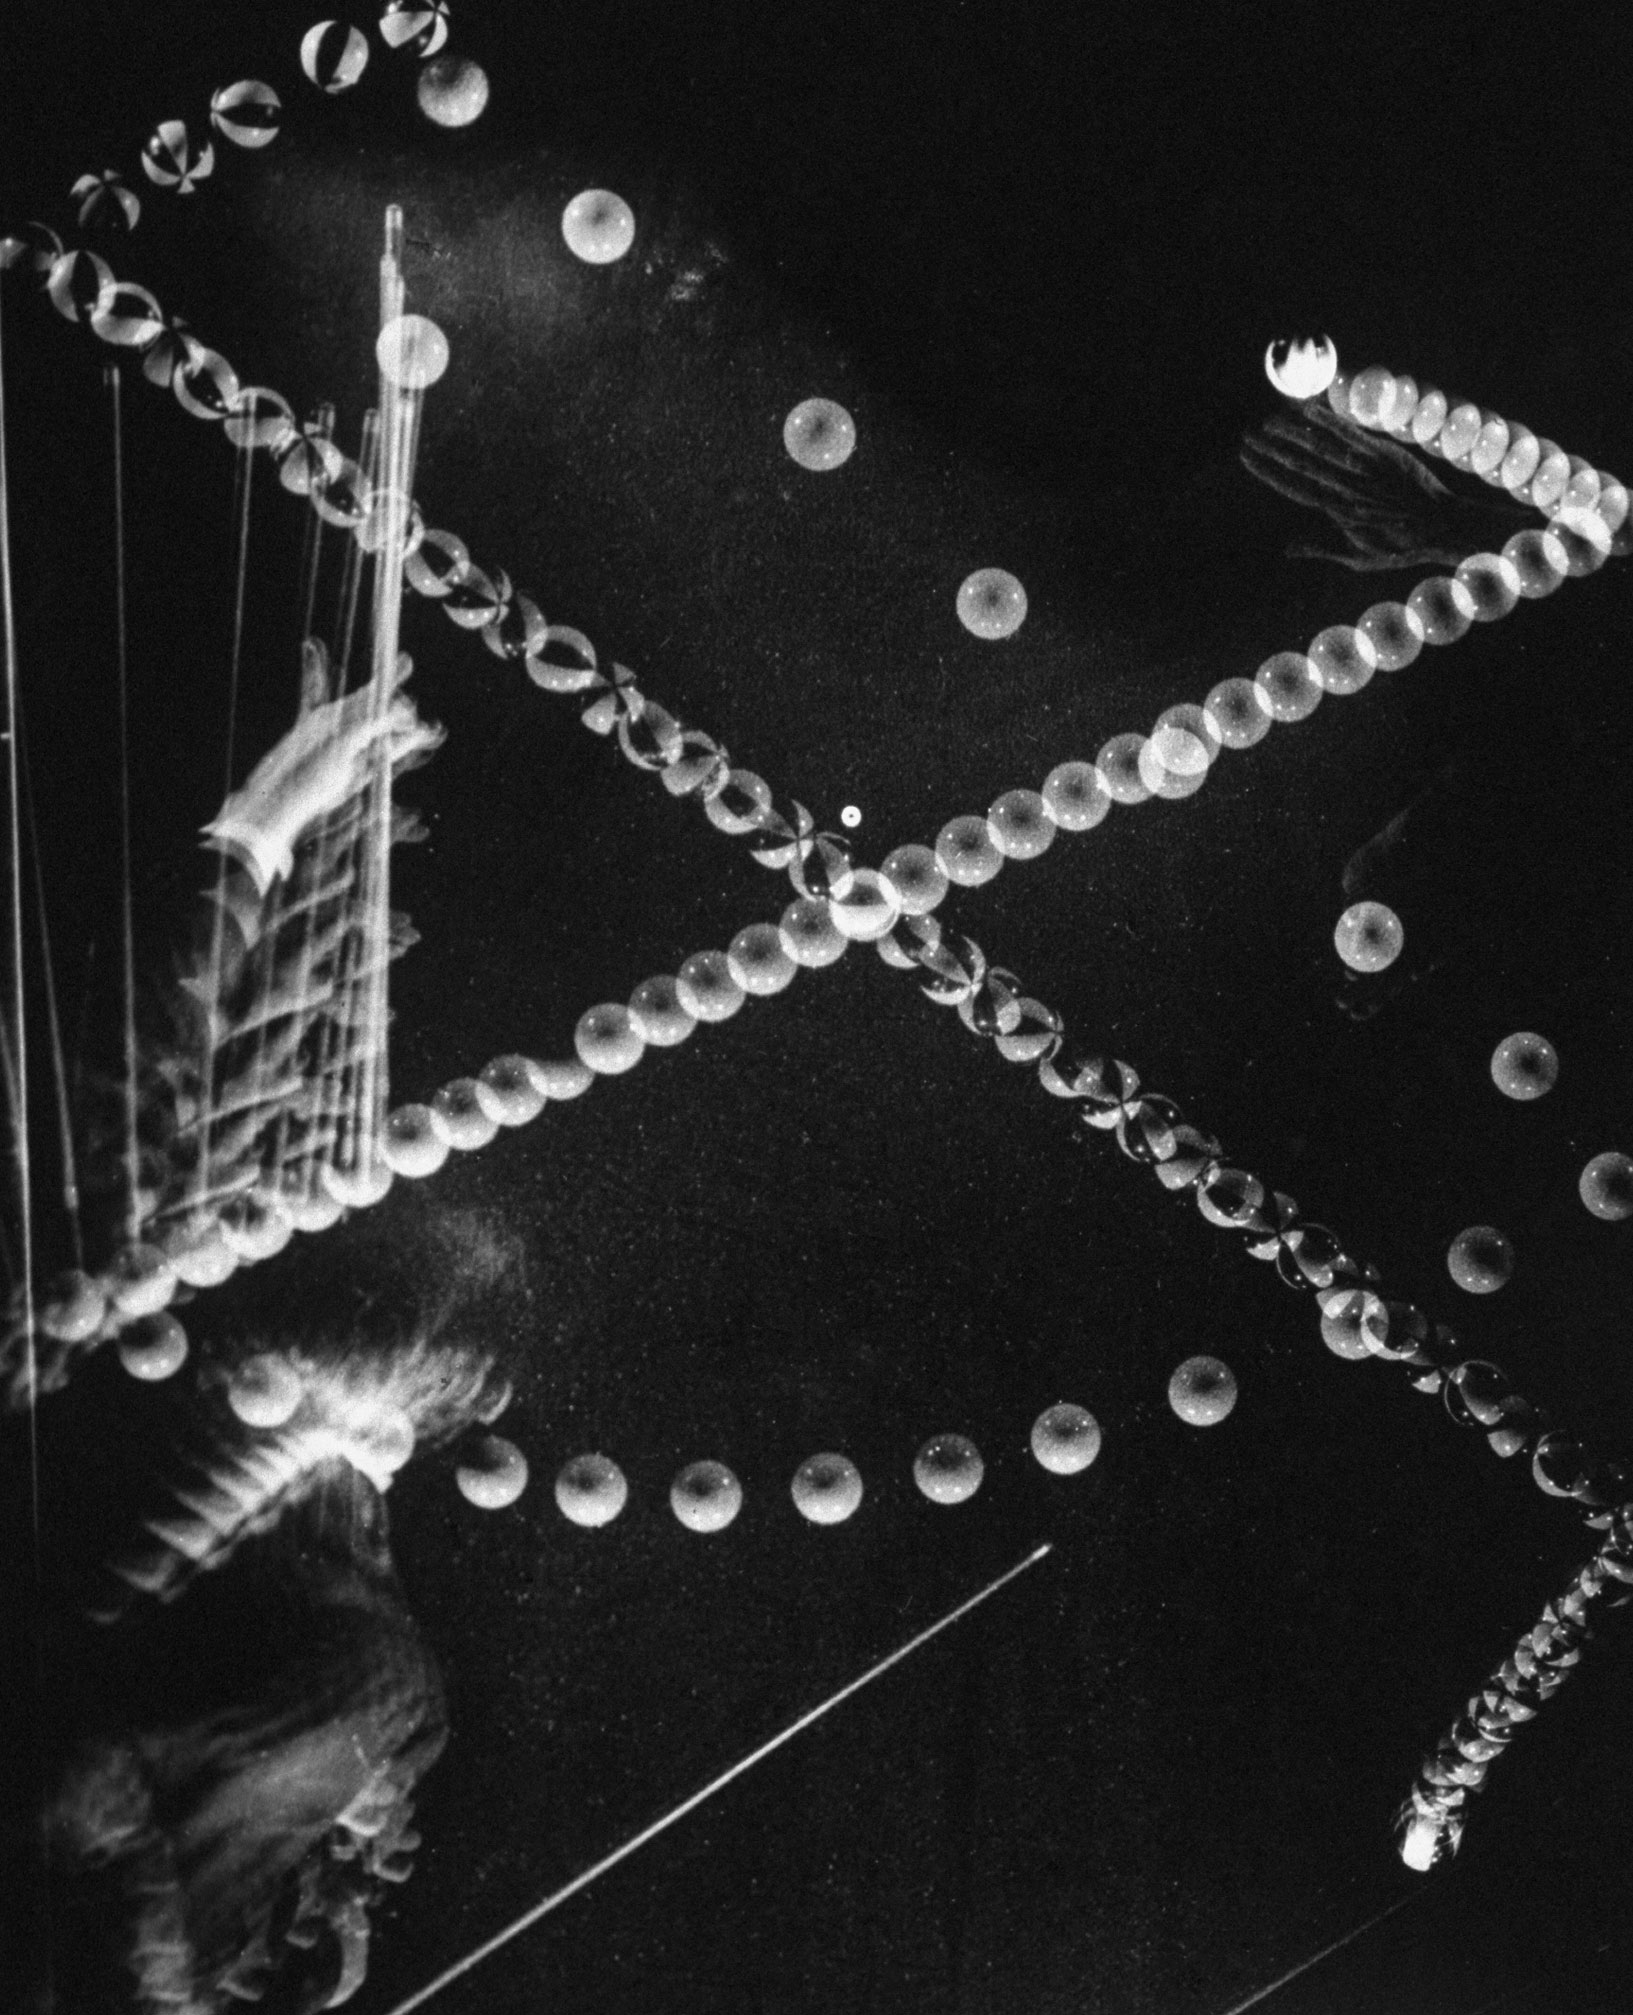 Stroboscopic image of a trick shot by billiards champion Willie Hoppe in 1941.